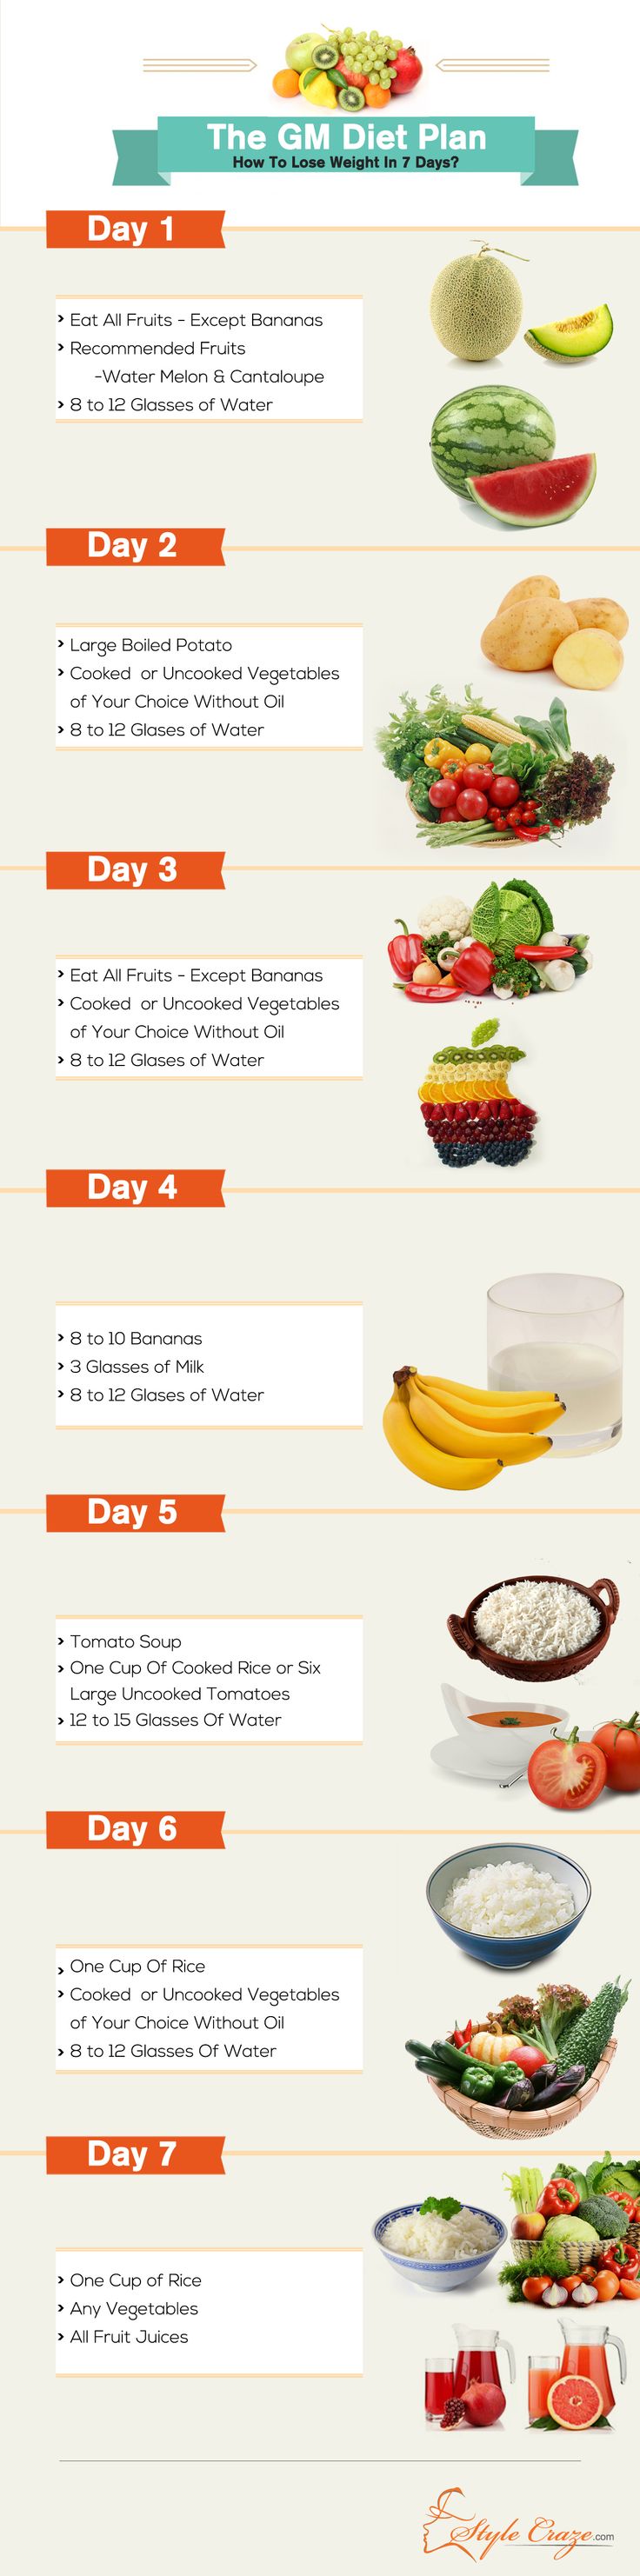 7-diet-plan-to-lose-weight-fast_57adf35a5bb67.jpg